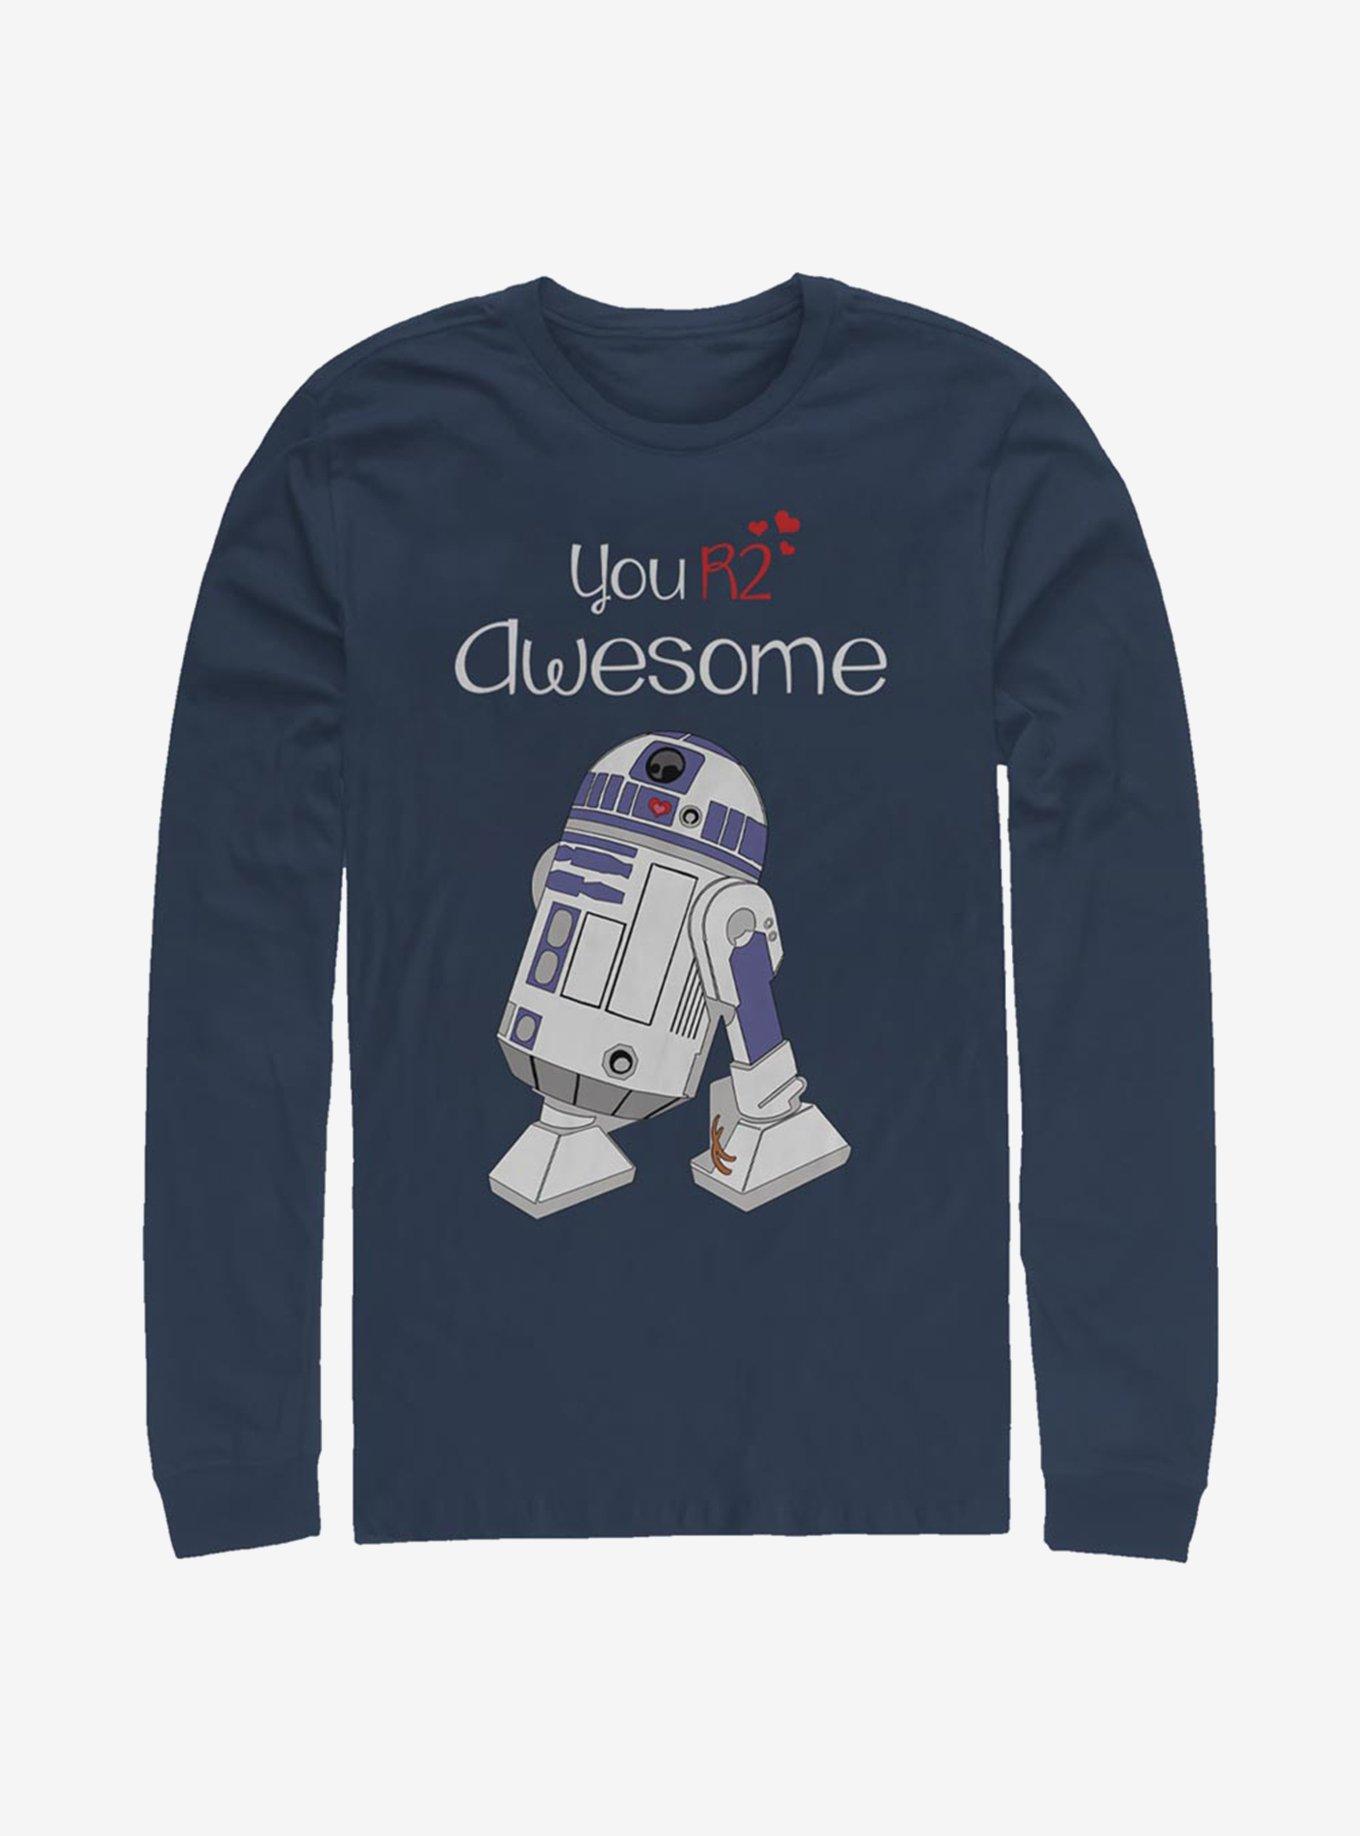 Star Wars You R2-D2 Awesome Long-Sleeve T-Shirt, NAVY, hi-res